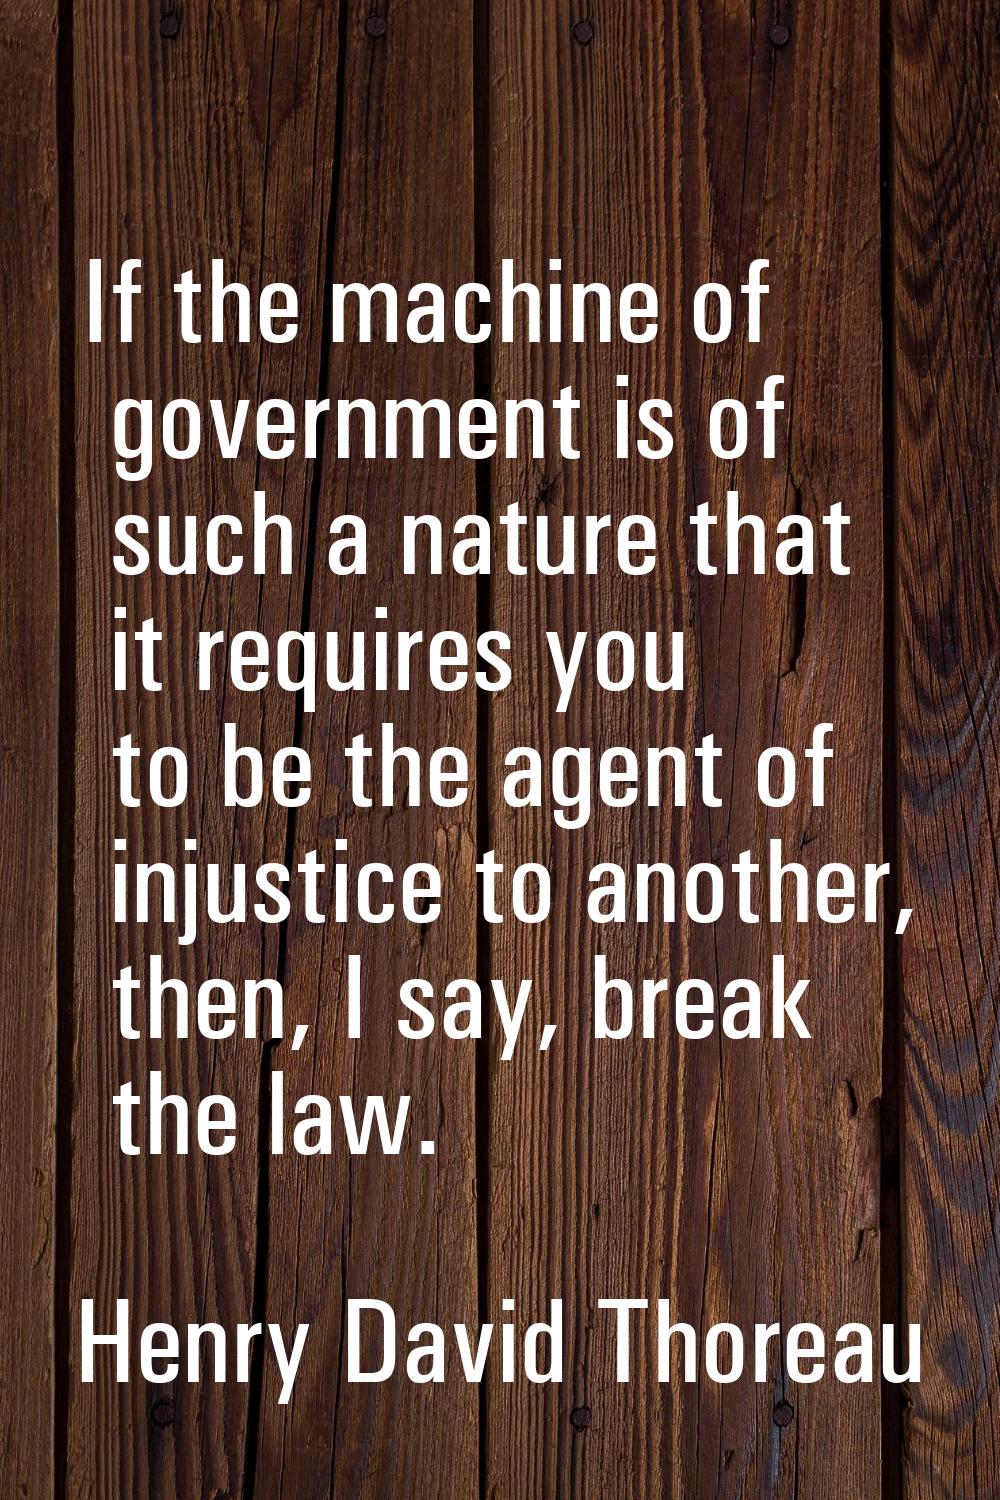 If the machine of government is of such a nature that it requires you to be the agent of injustice 